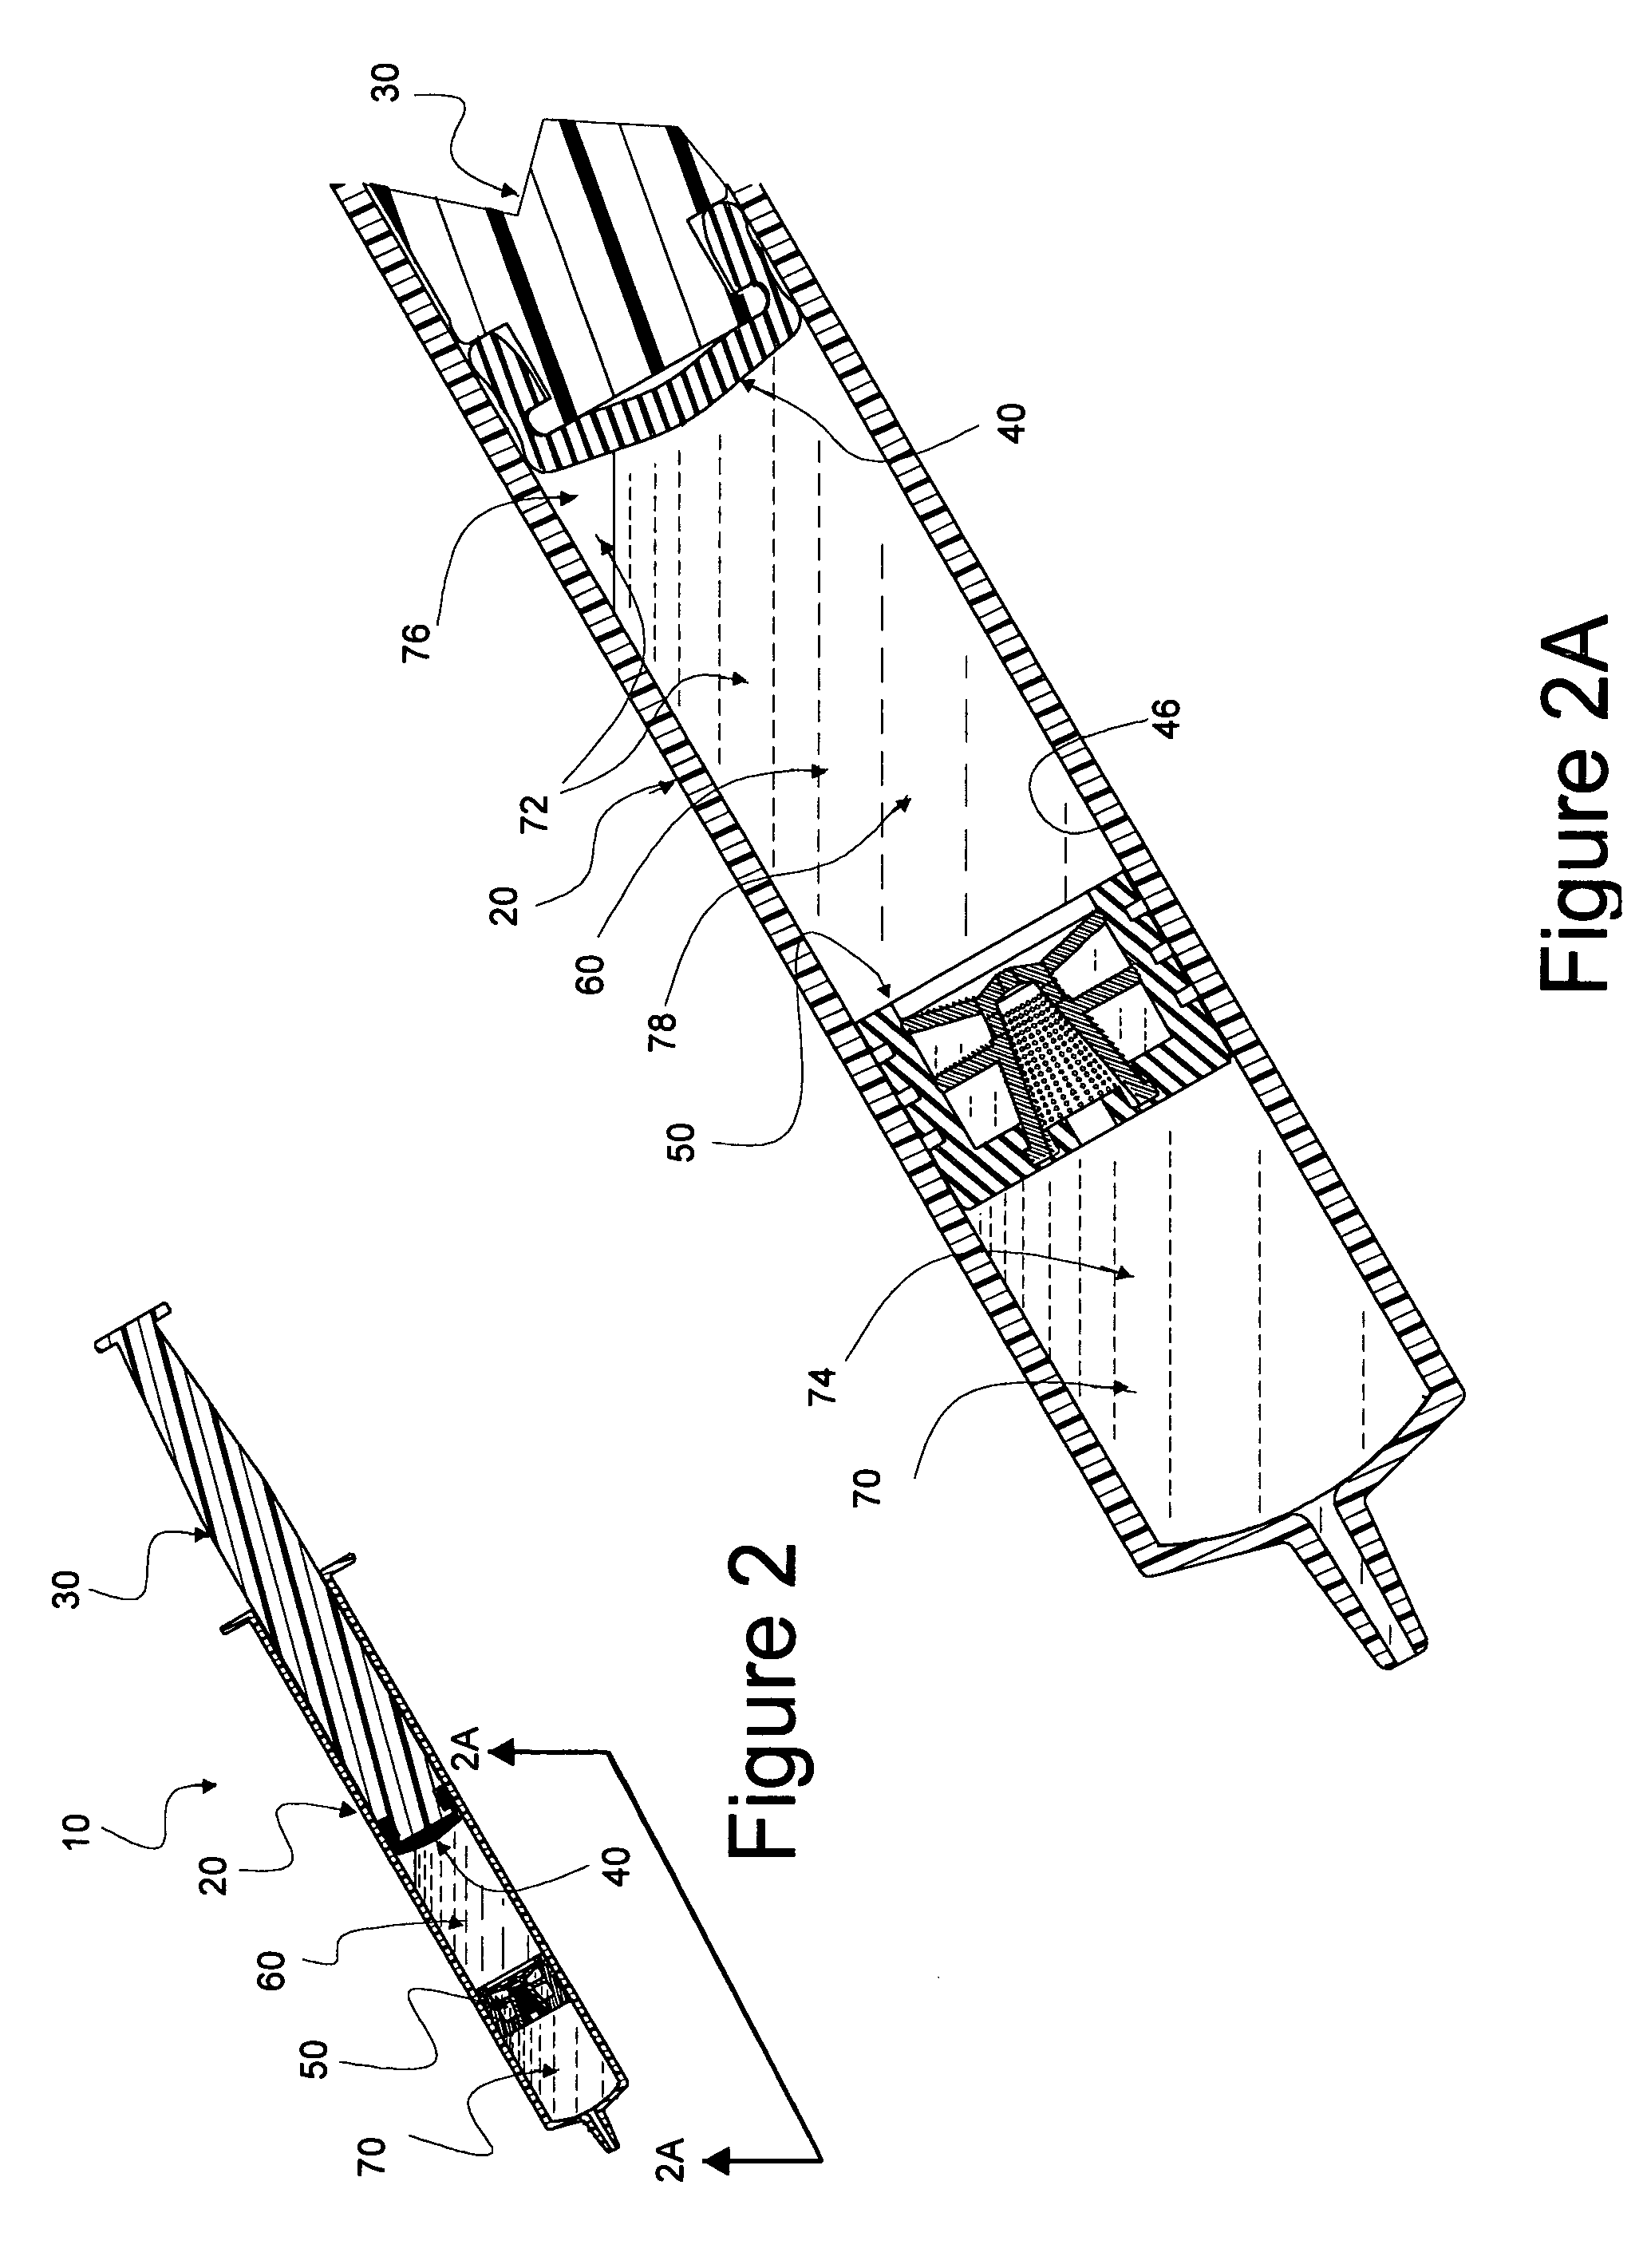 Multi-chamber, sequential dose dispensing syringe